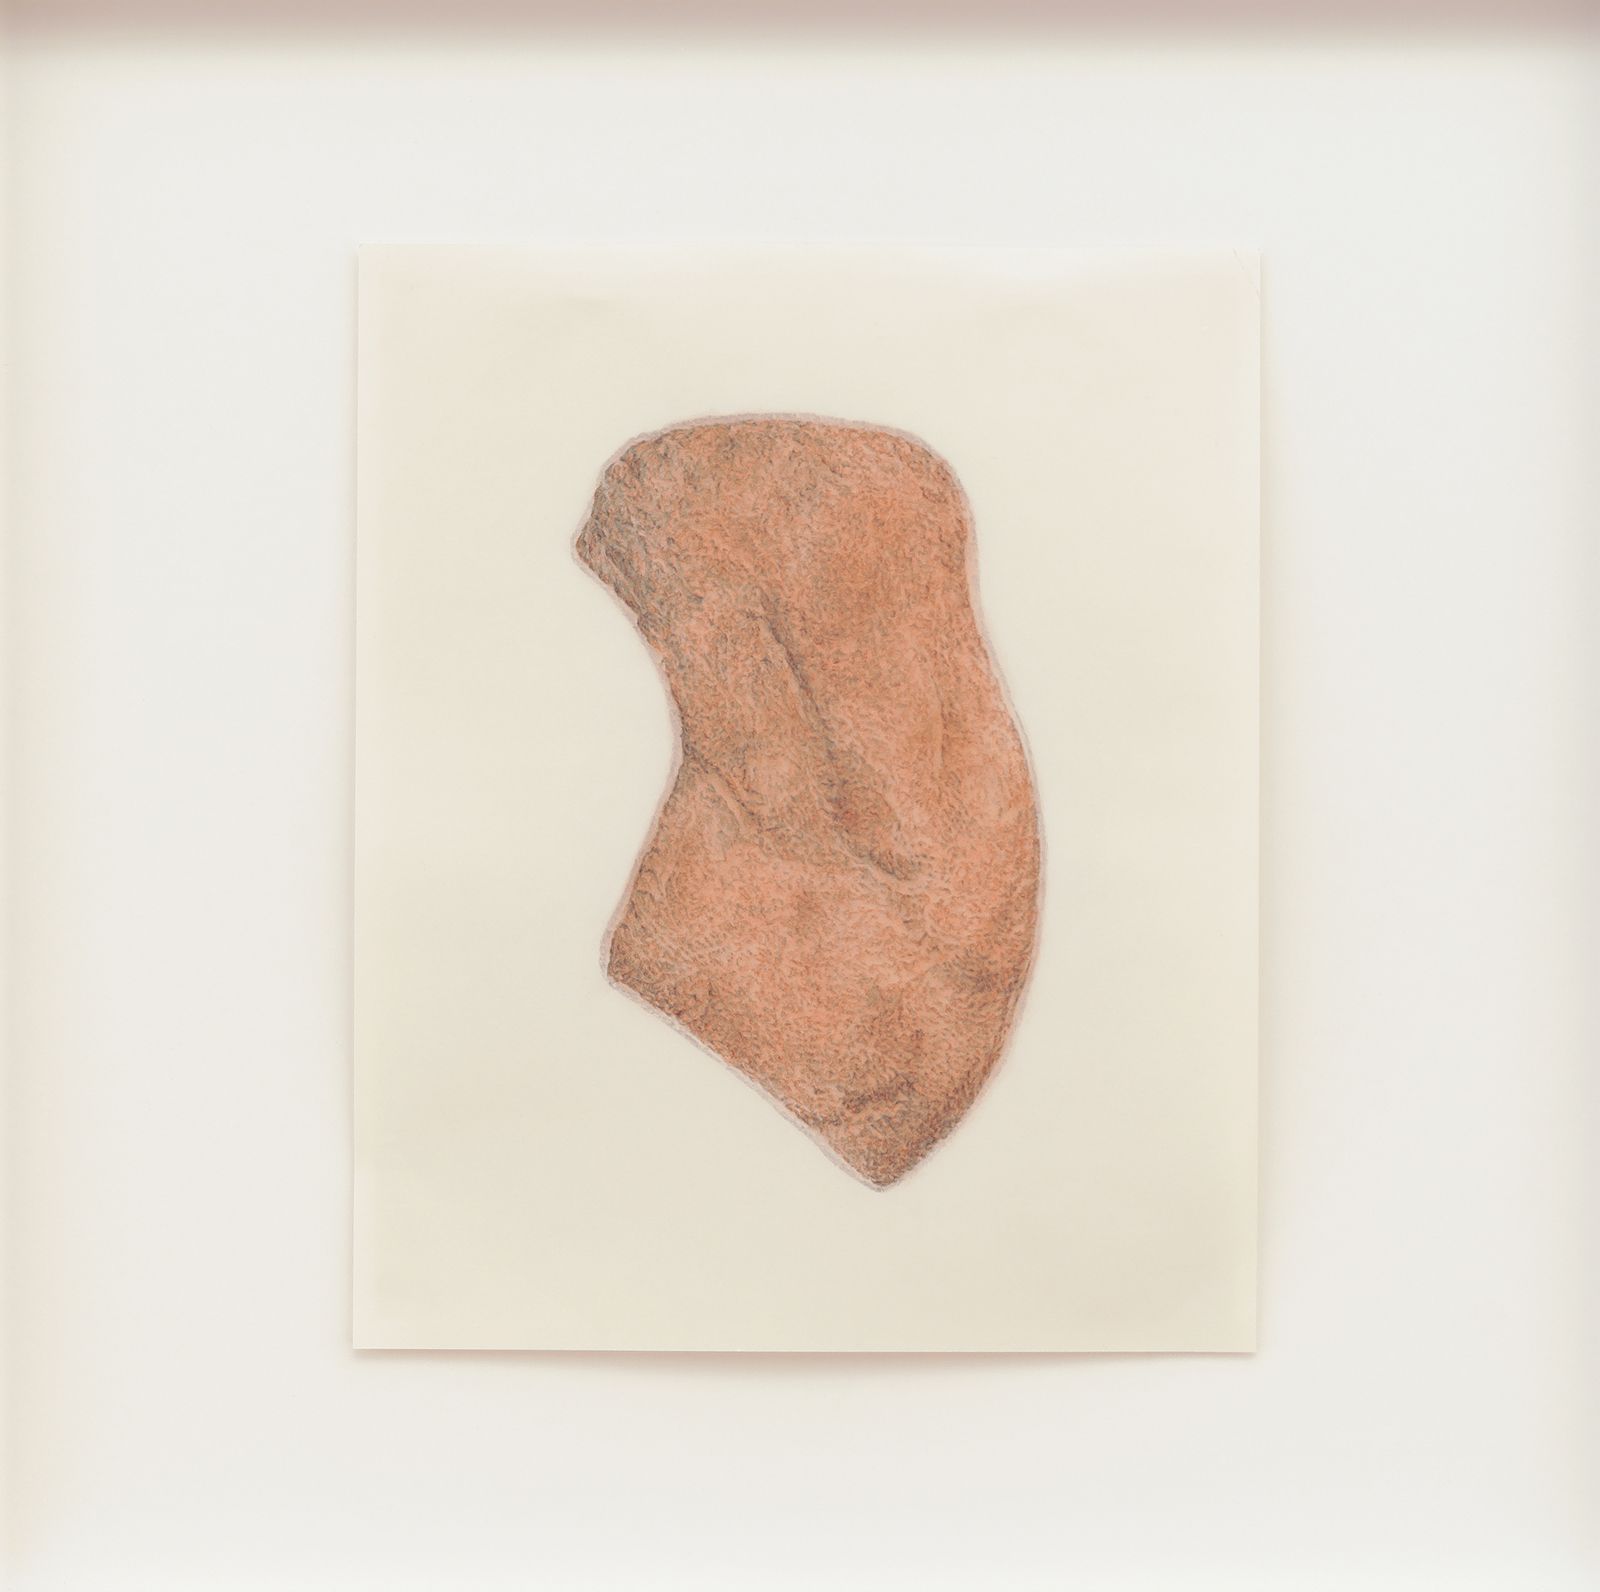 Michael Wang, UNTITLED FRAGMENT (WISENTDENKMAL), 2012, graphite and red bole on paper, 13 × 11 in.